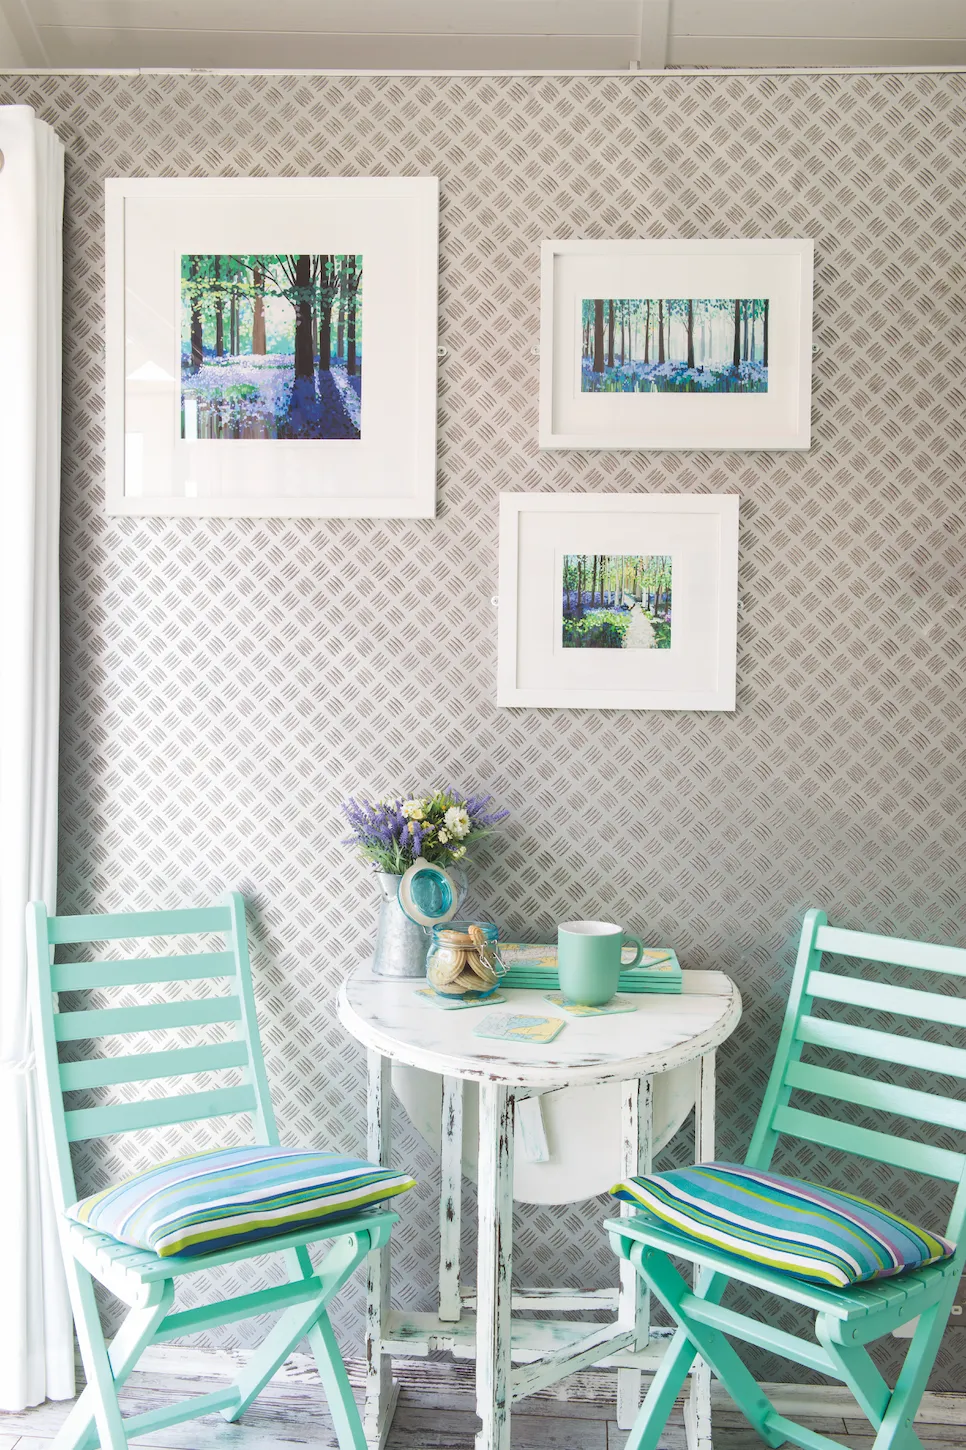 Real home - silver textured wallpaper and turquoise folding chairs